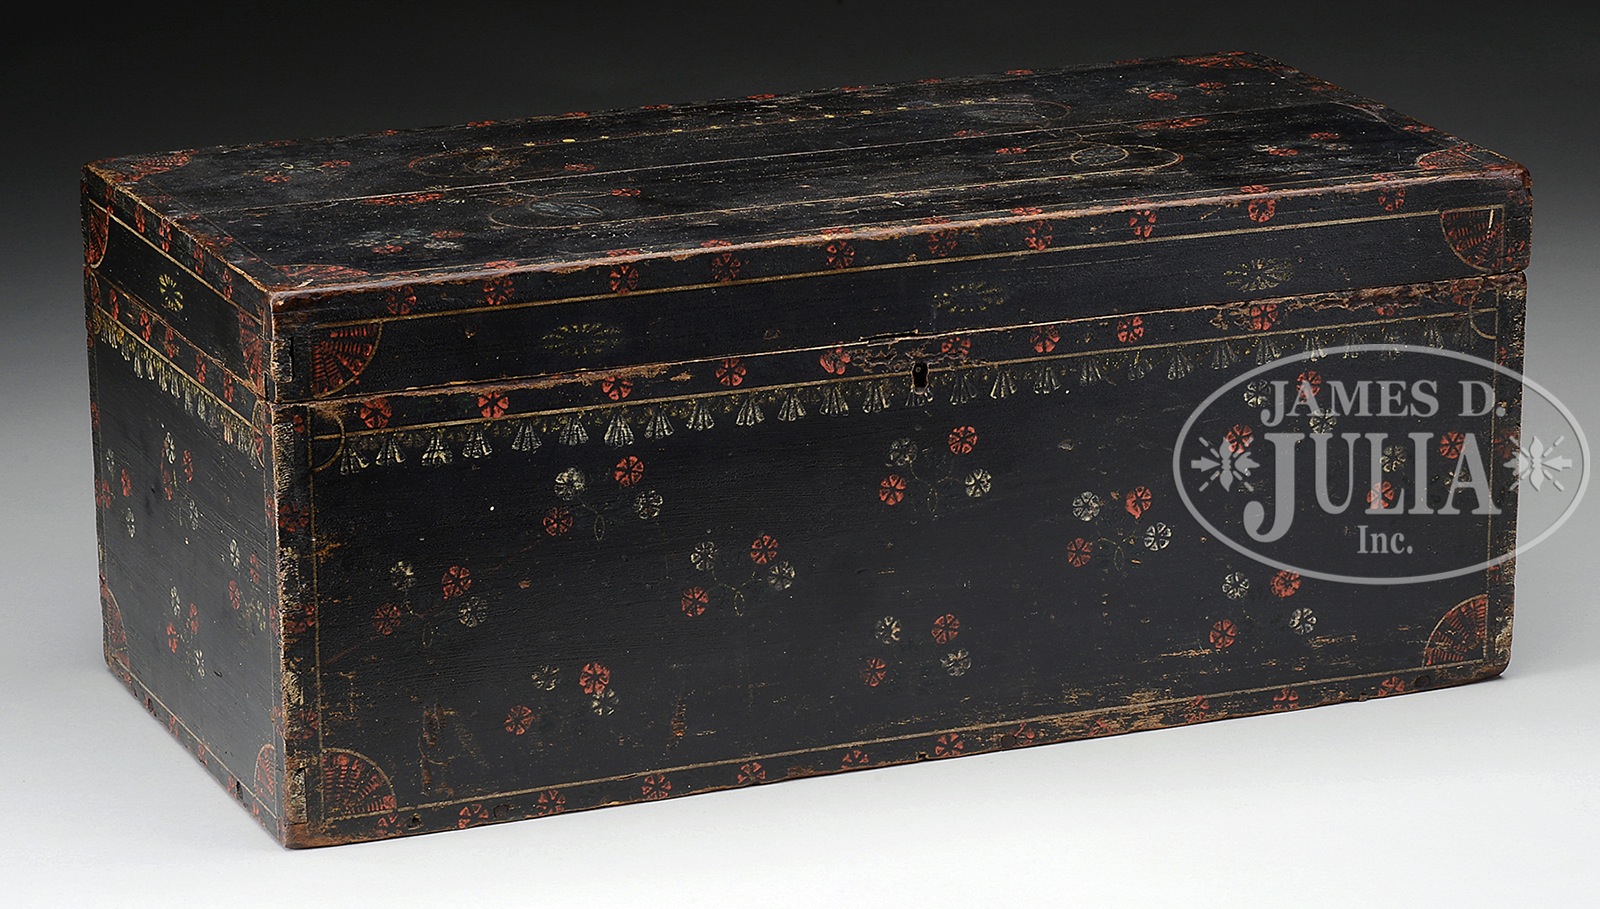 EARLY AMERICAN PAINT DECORATED KEEPSAKE BOX. First half 19th century, New England. The pine box with